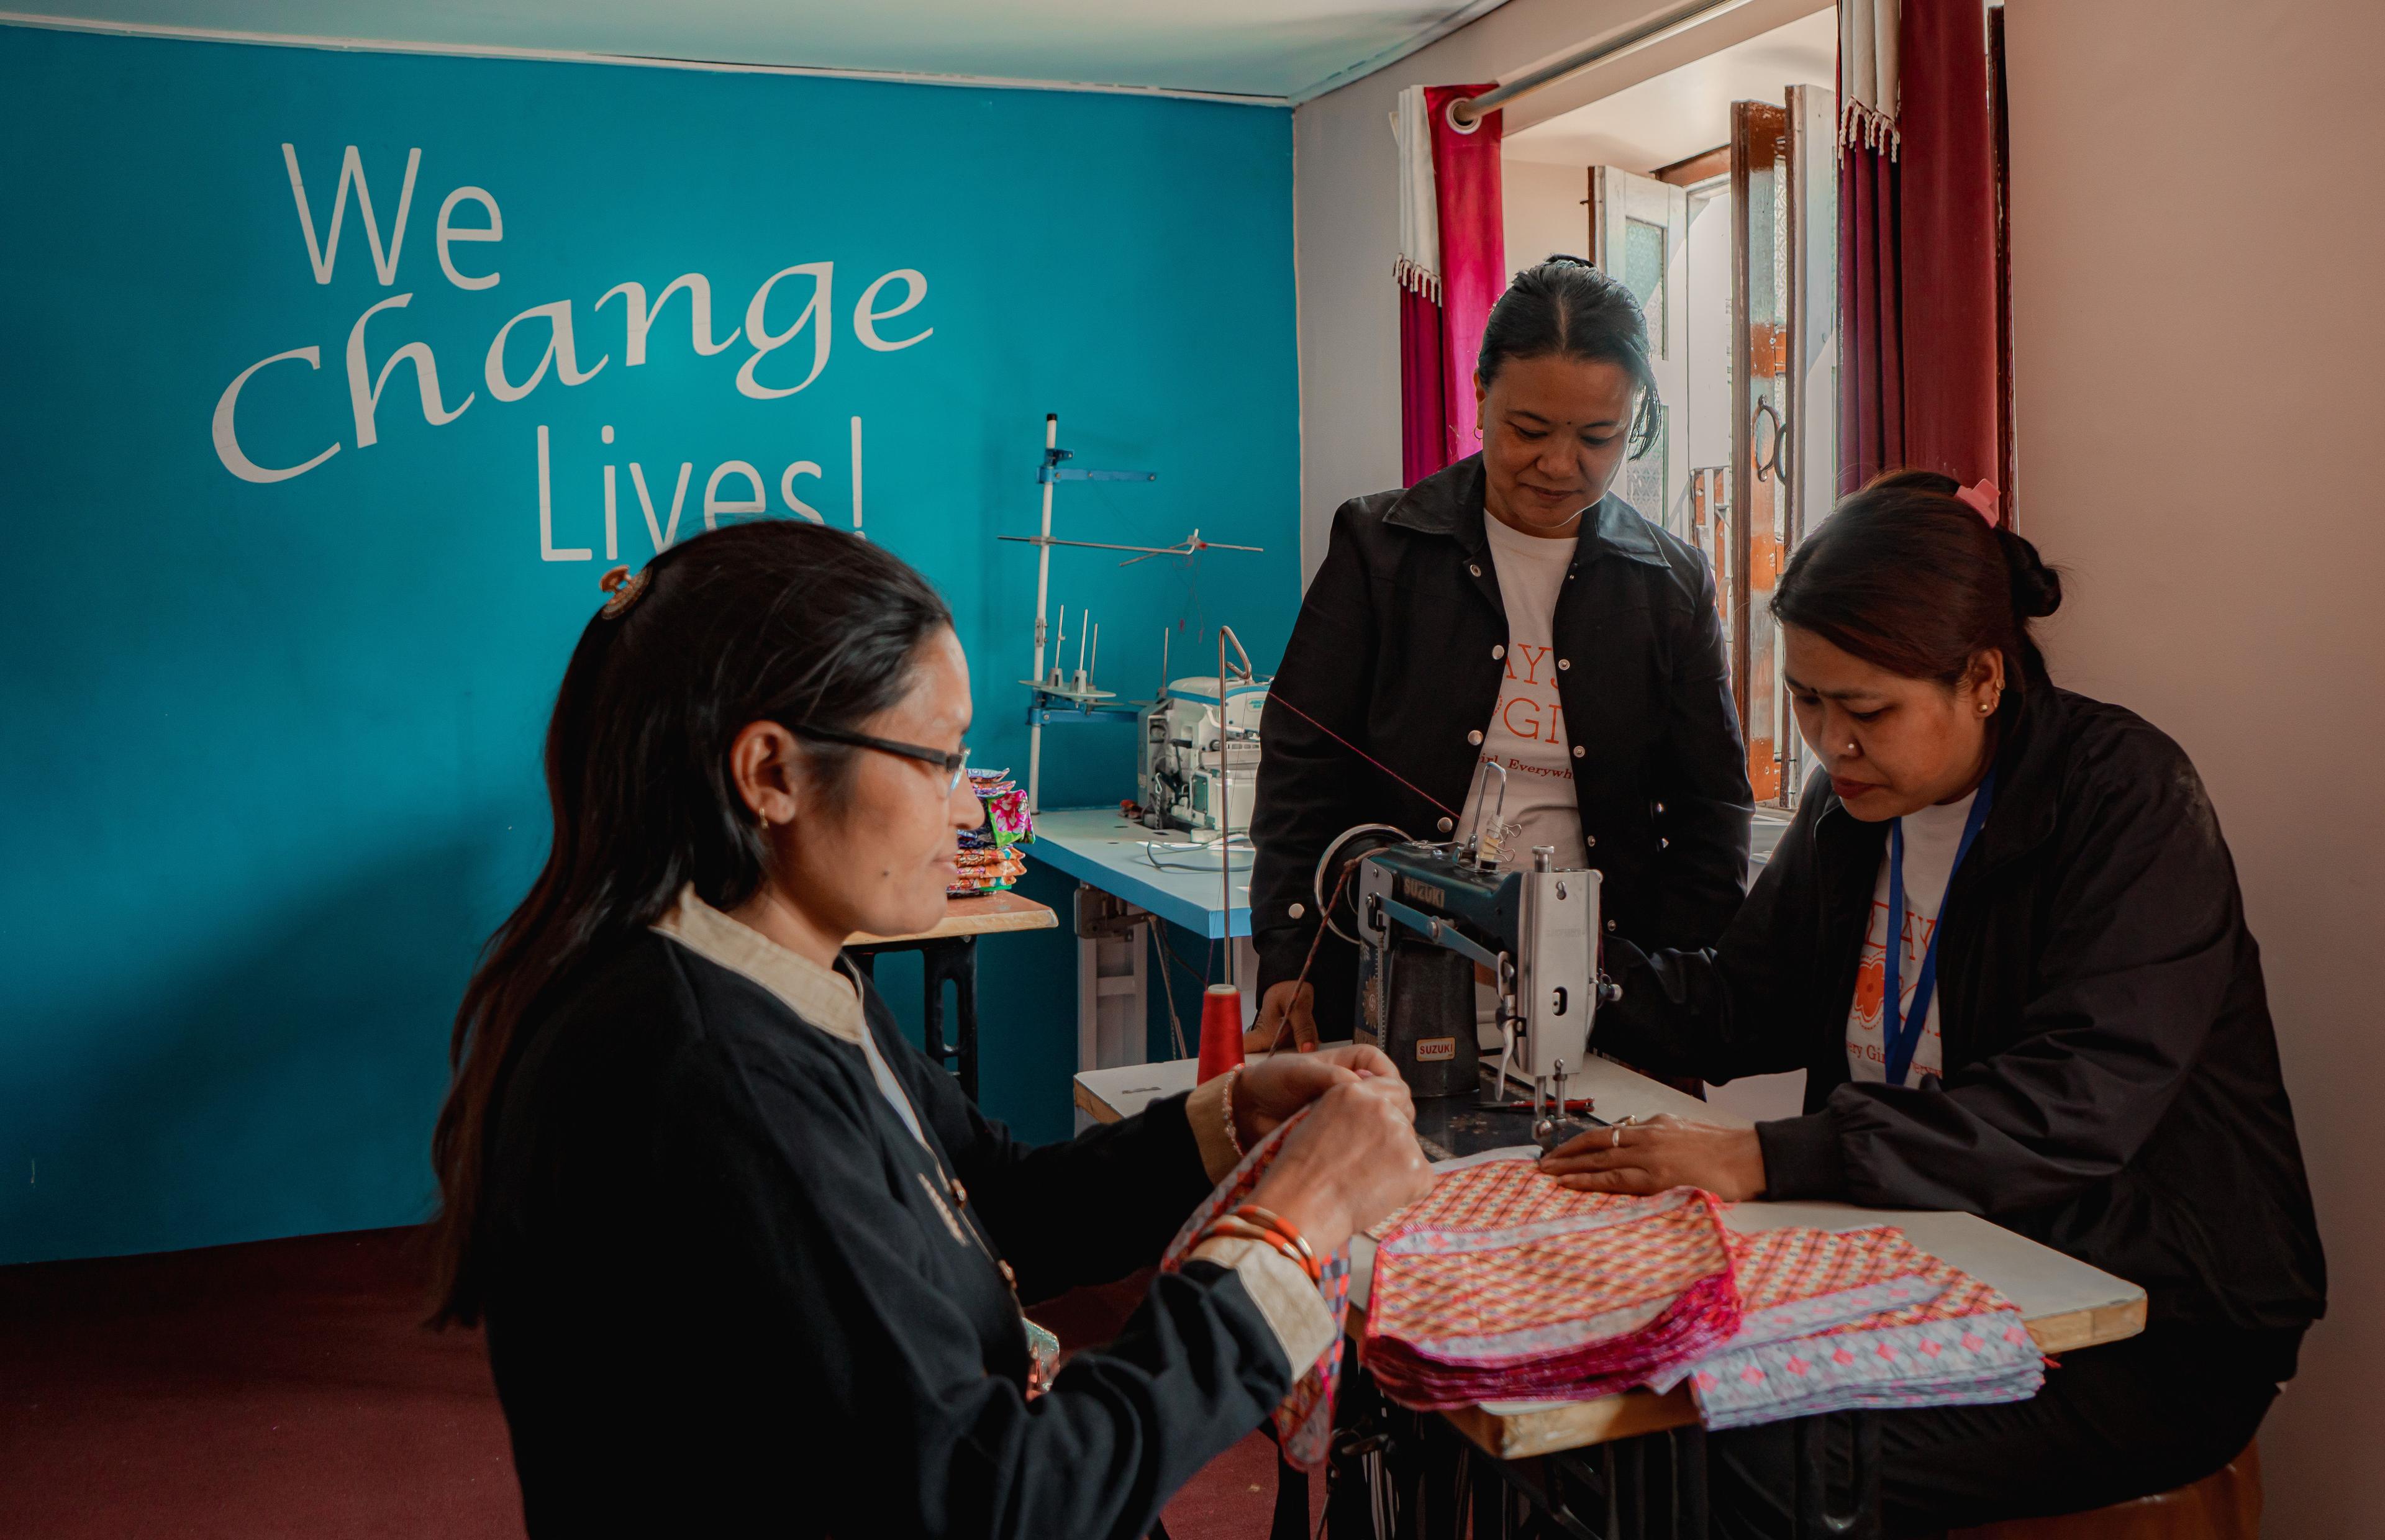 Women in Nepal are empowered through outreach